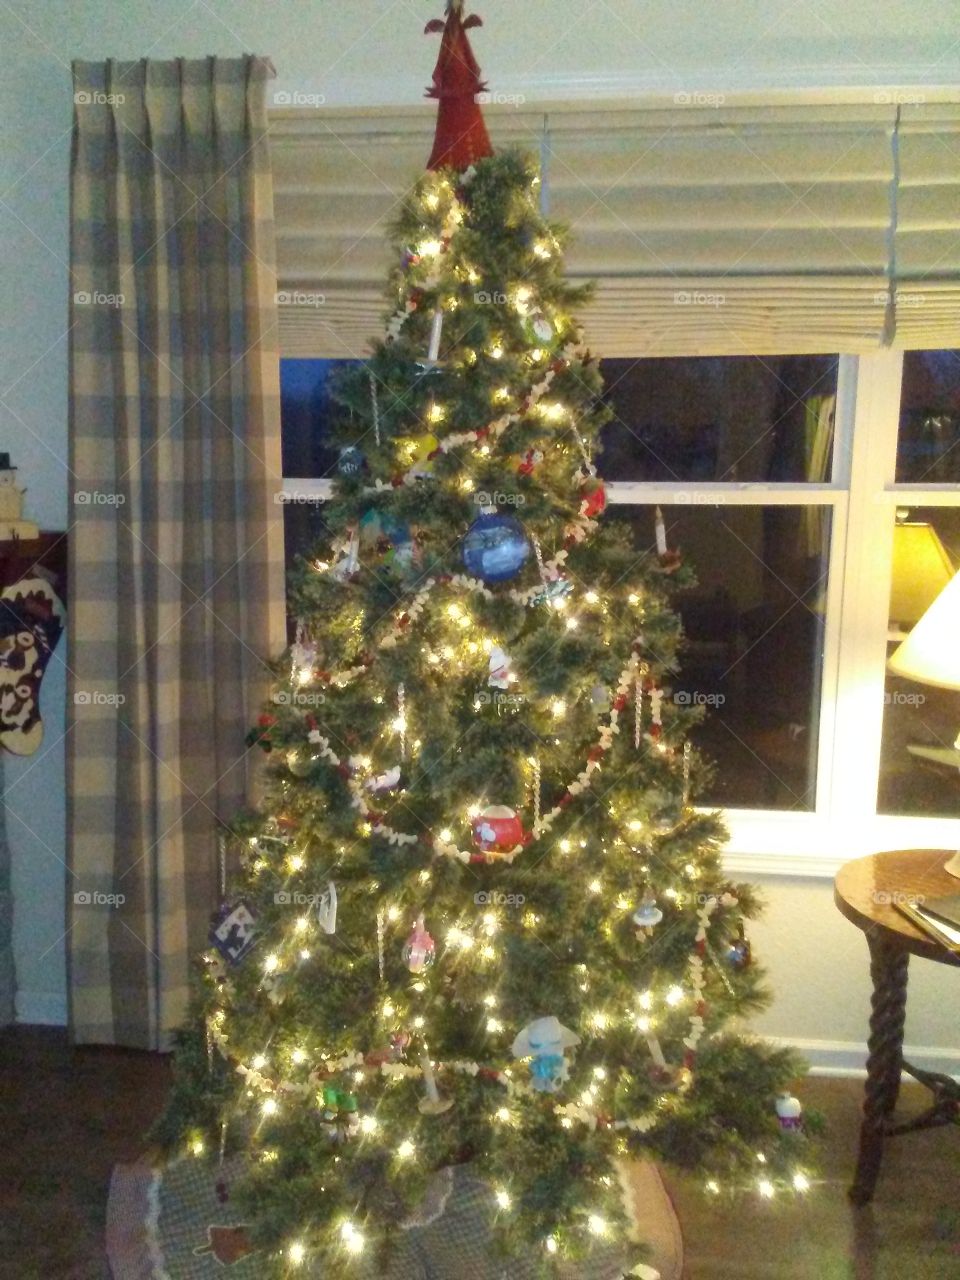 The Christmas Tree is all decorated at my Mother's condo in. Plymouth, Wisconsin.